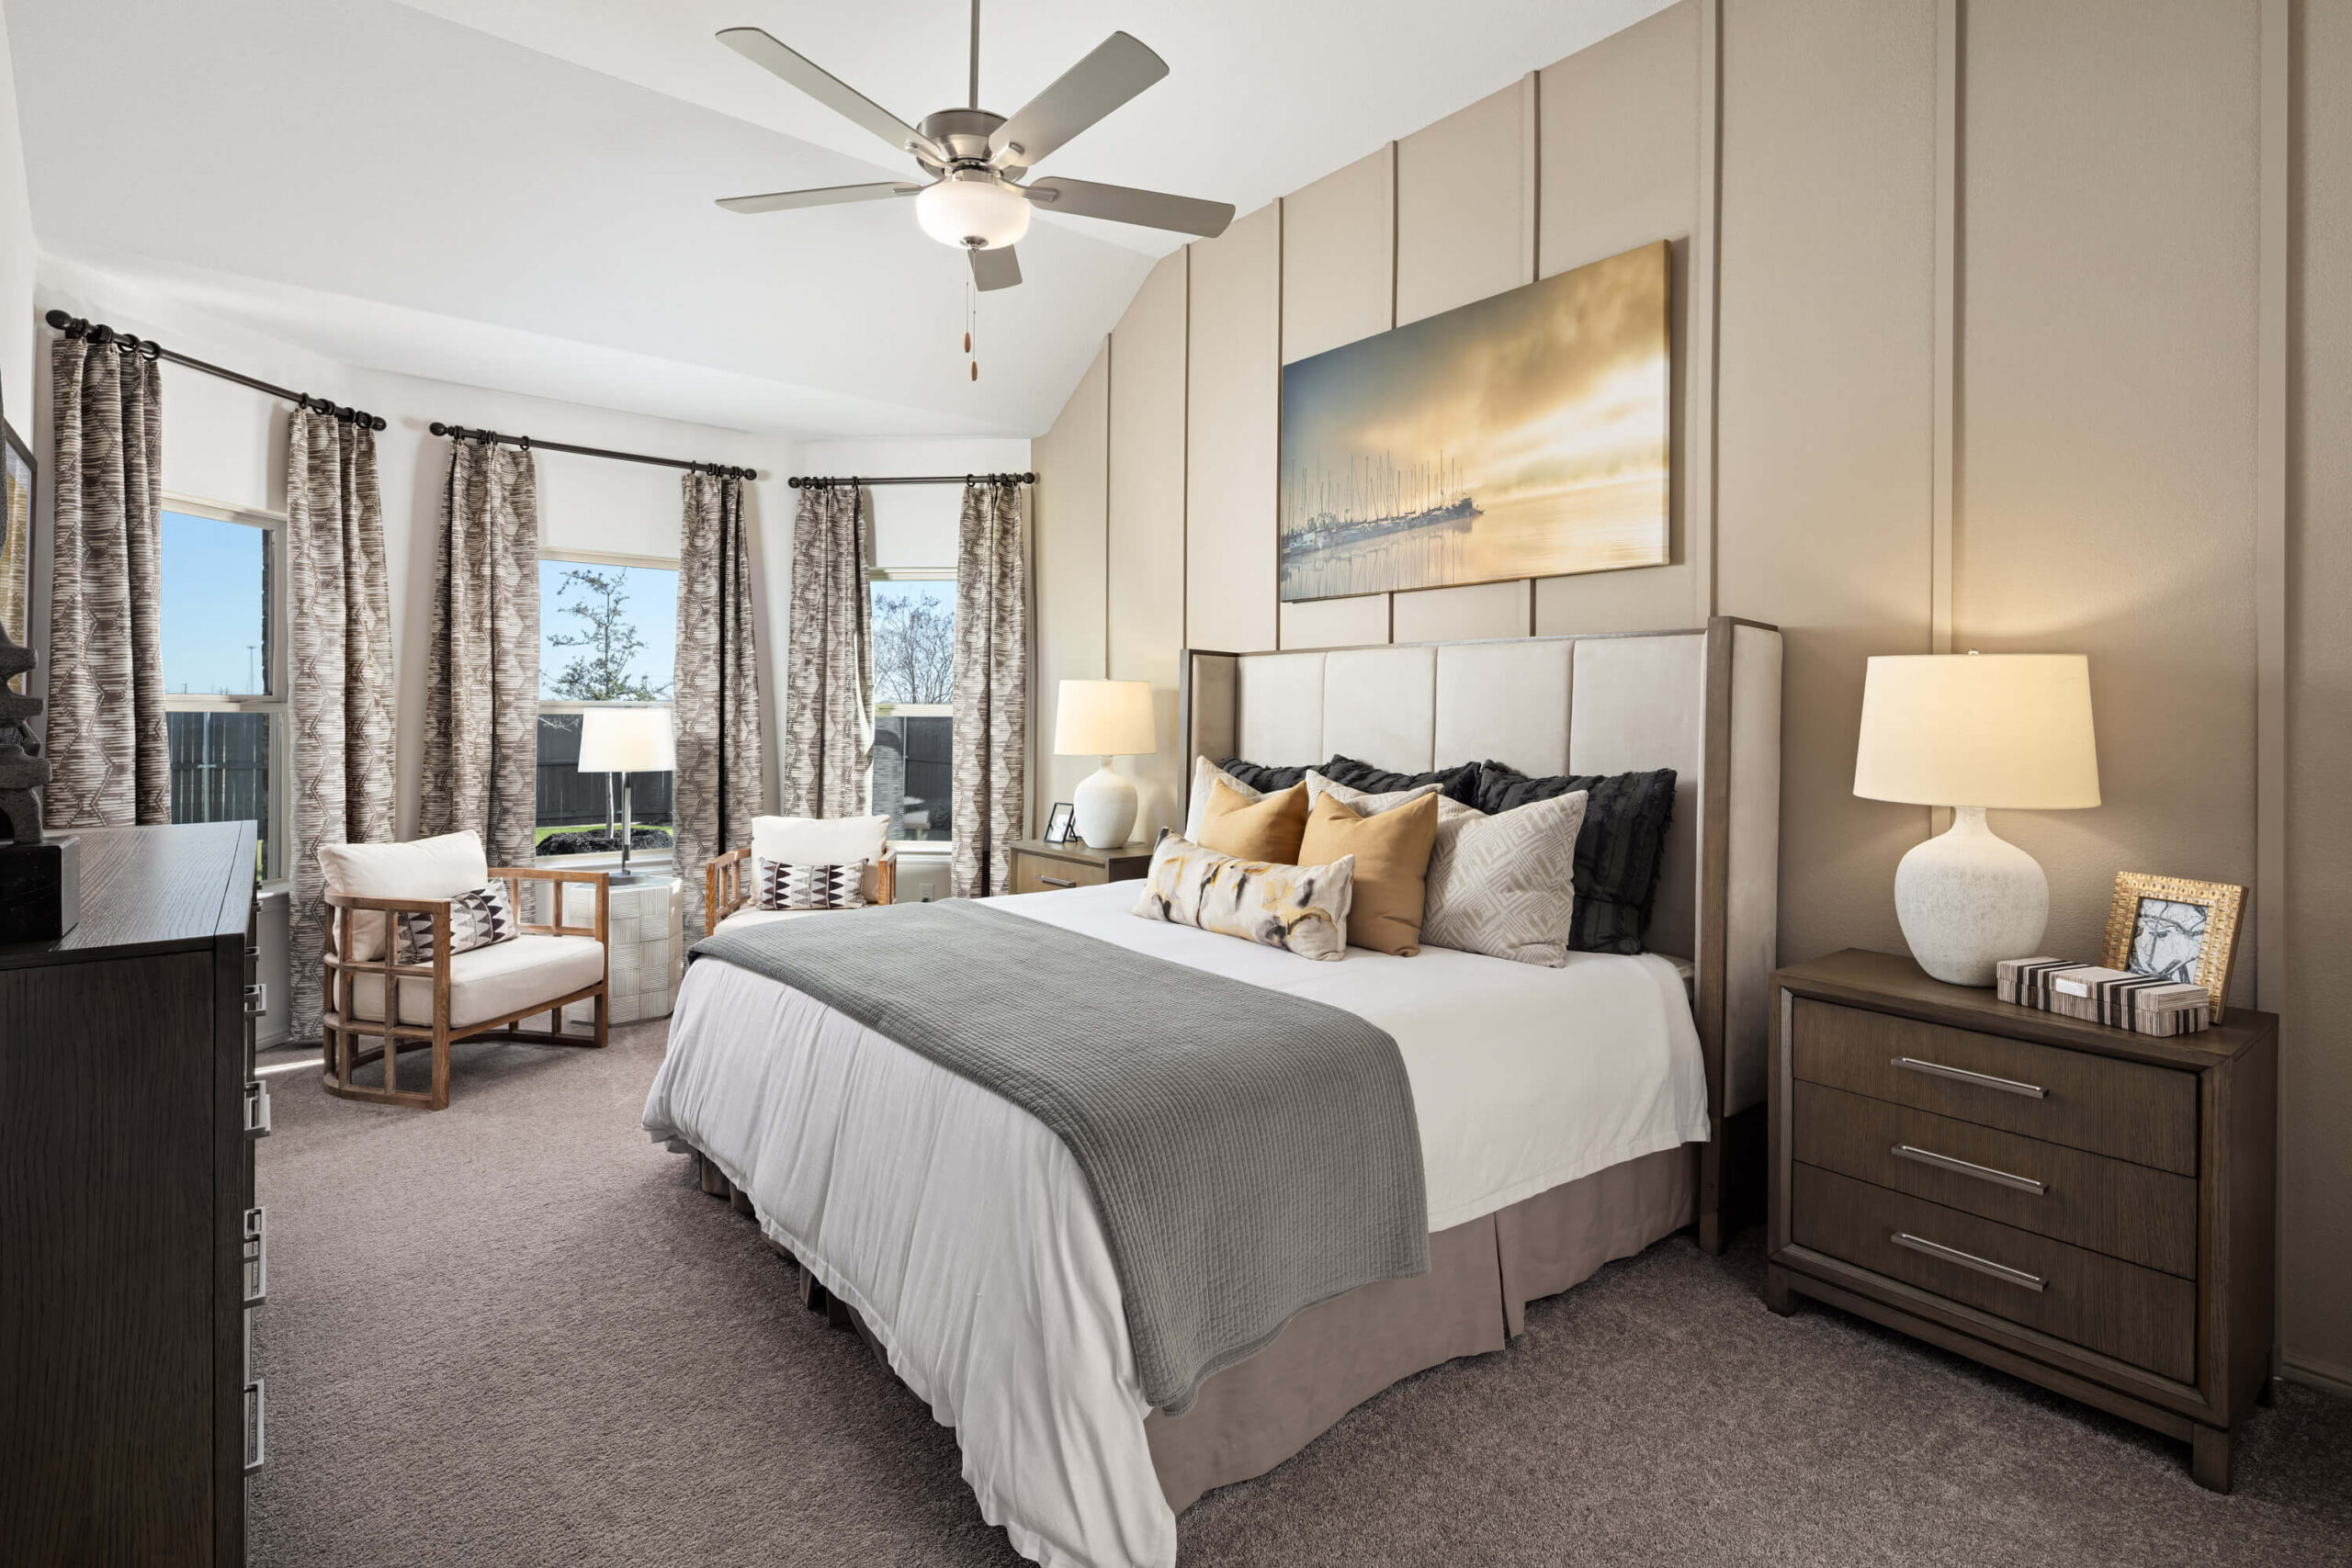 A well-appointed bedroom in new home communities in Mansfield TX, featuring a queen-sized bed with decorative pillows, two nightstands, a ceiling fan, and large windows with patterned curtains.